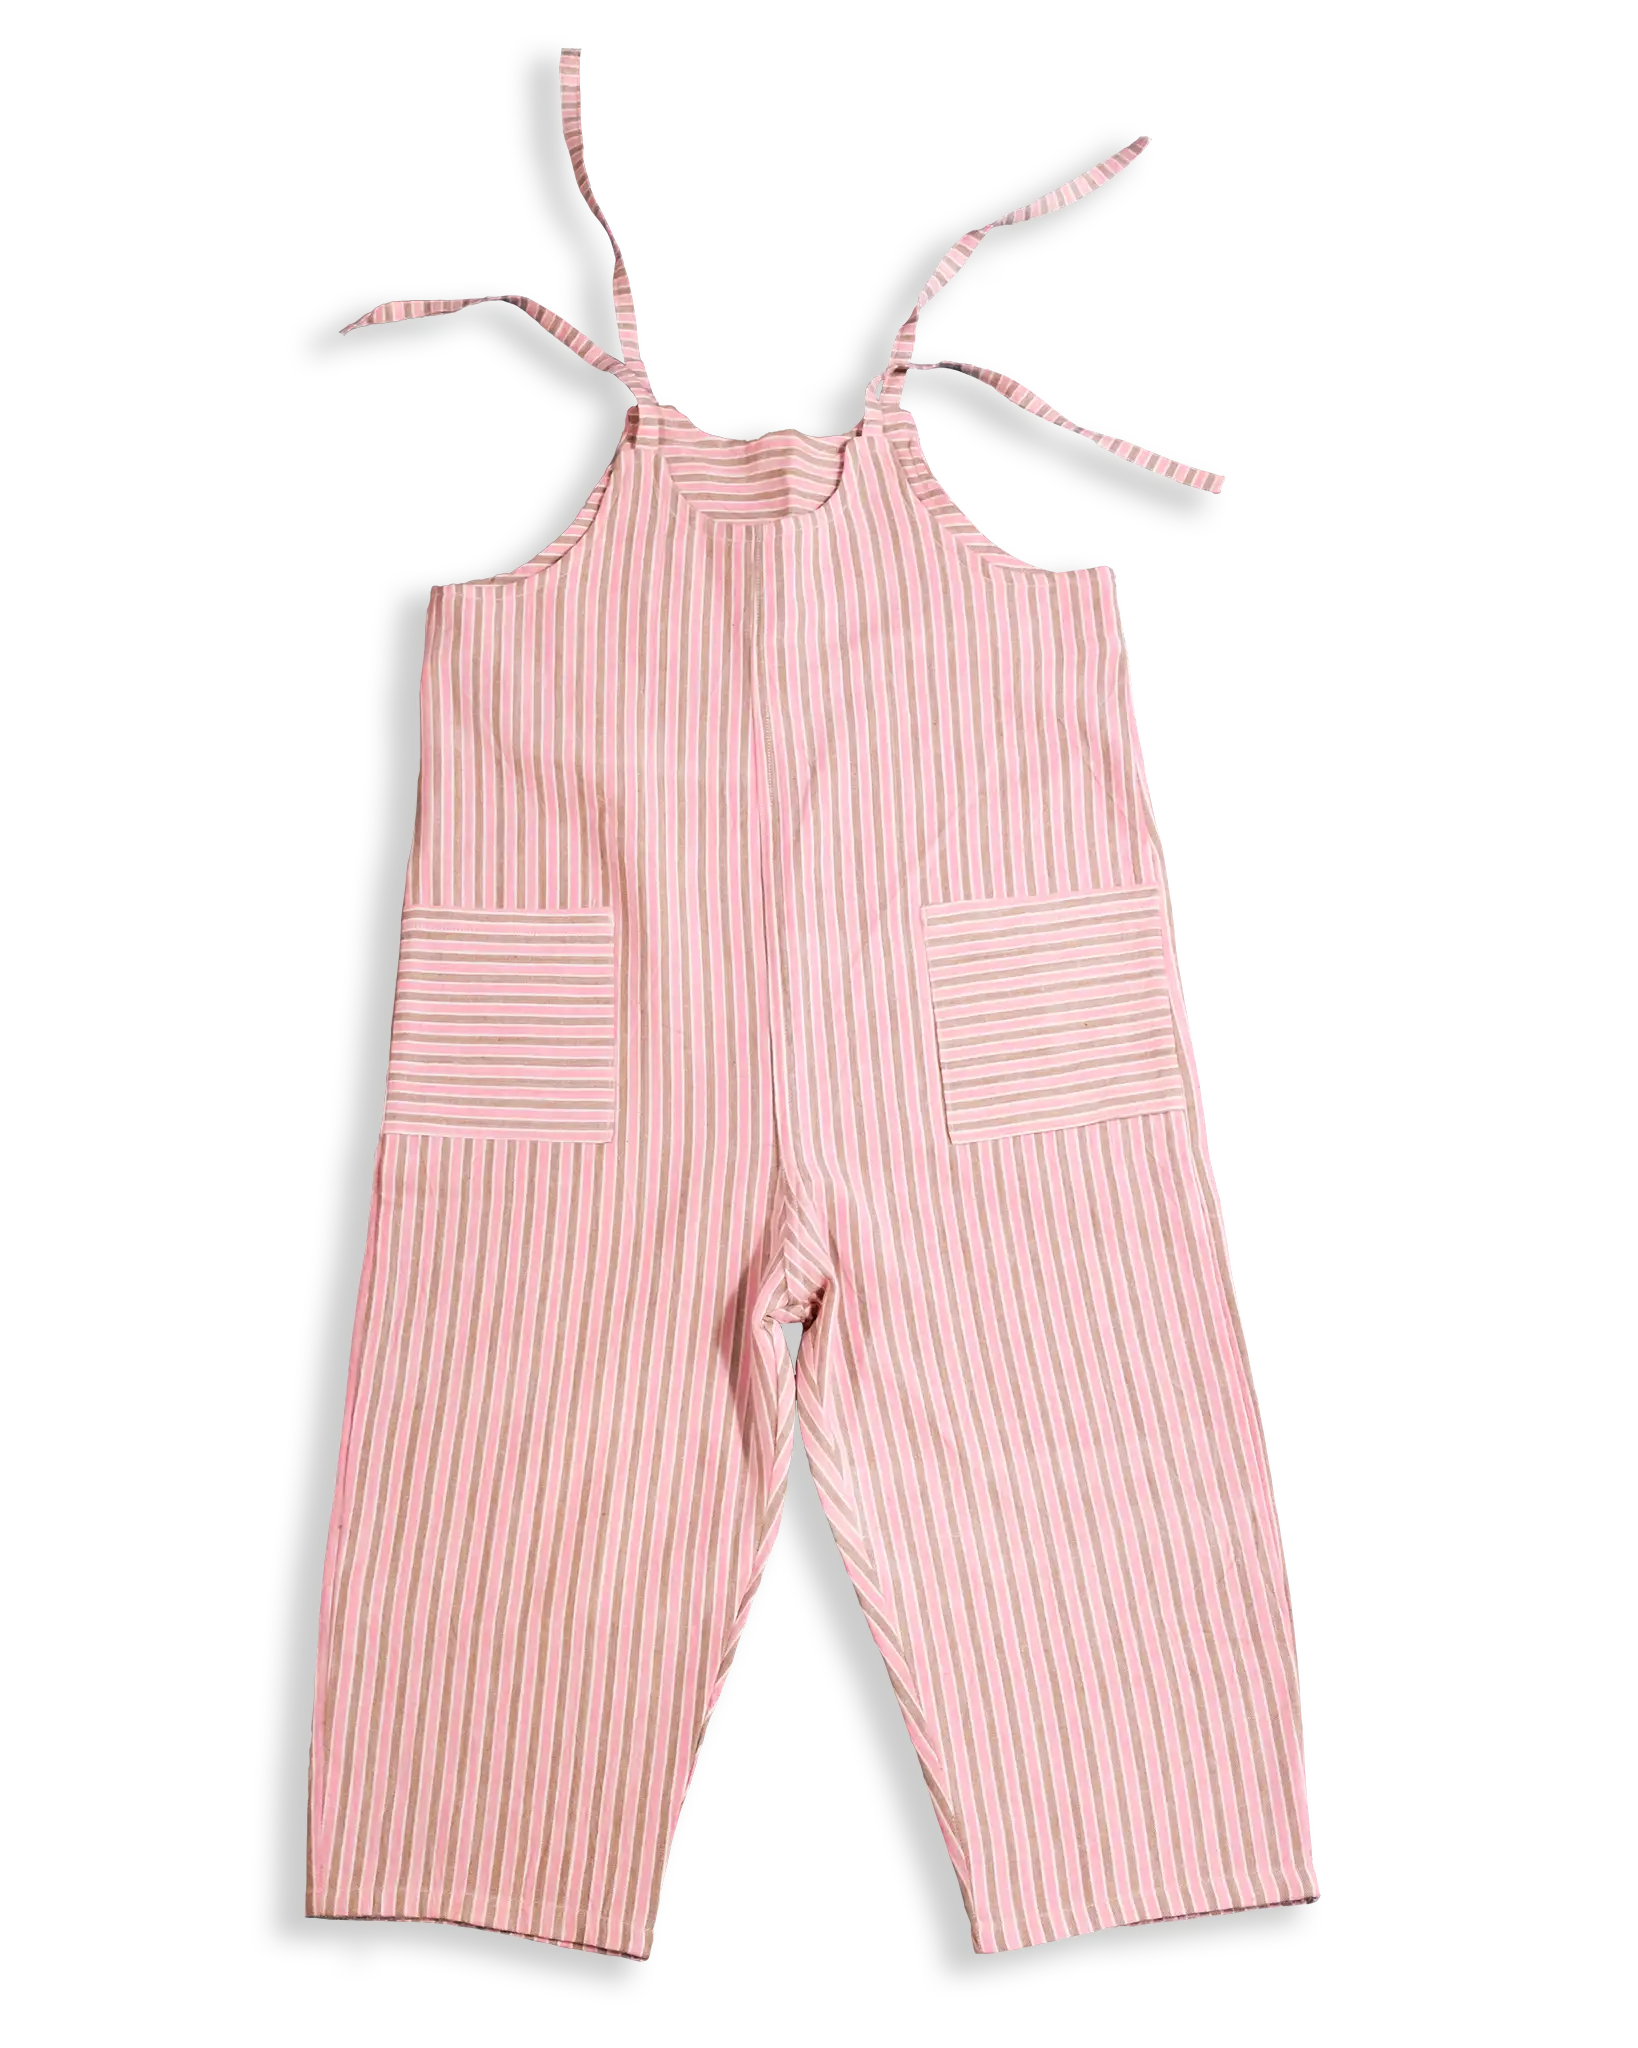 Children love soft, breathable cotton clothes! These Dungarees are made from woven fabrics which are unisex, simple yet cool to wear this summer.